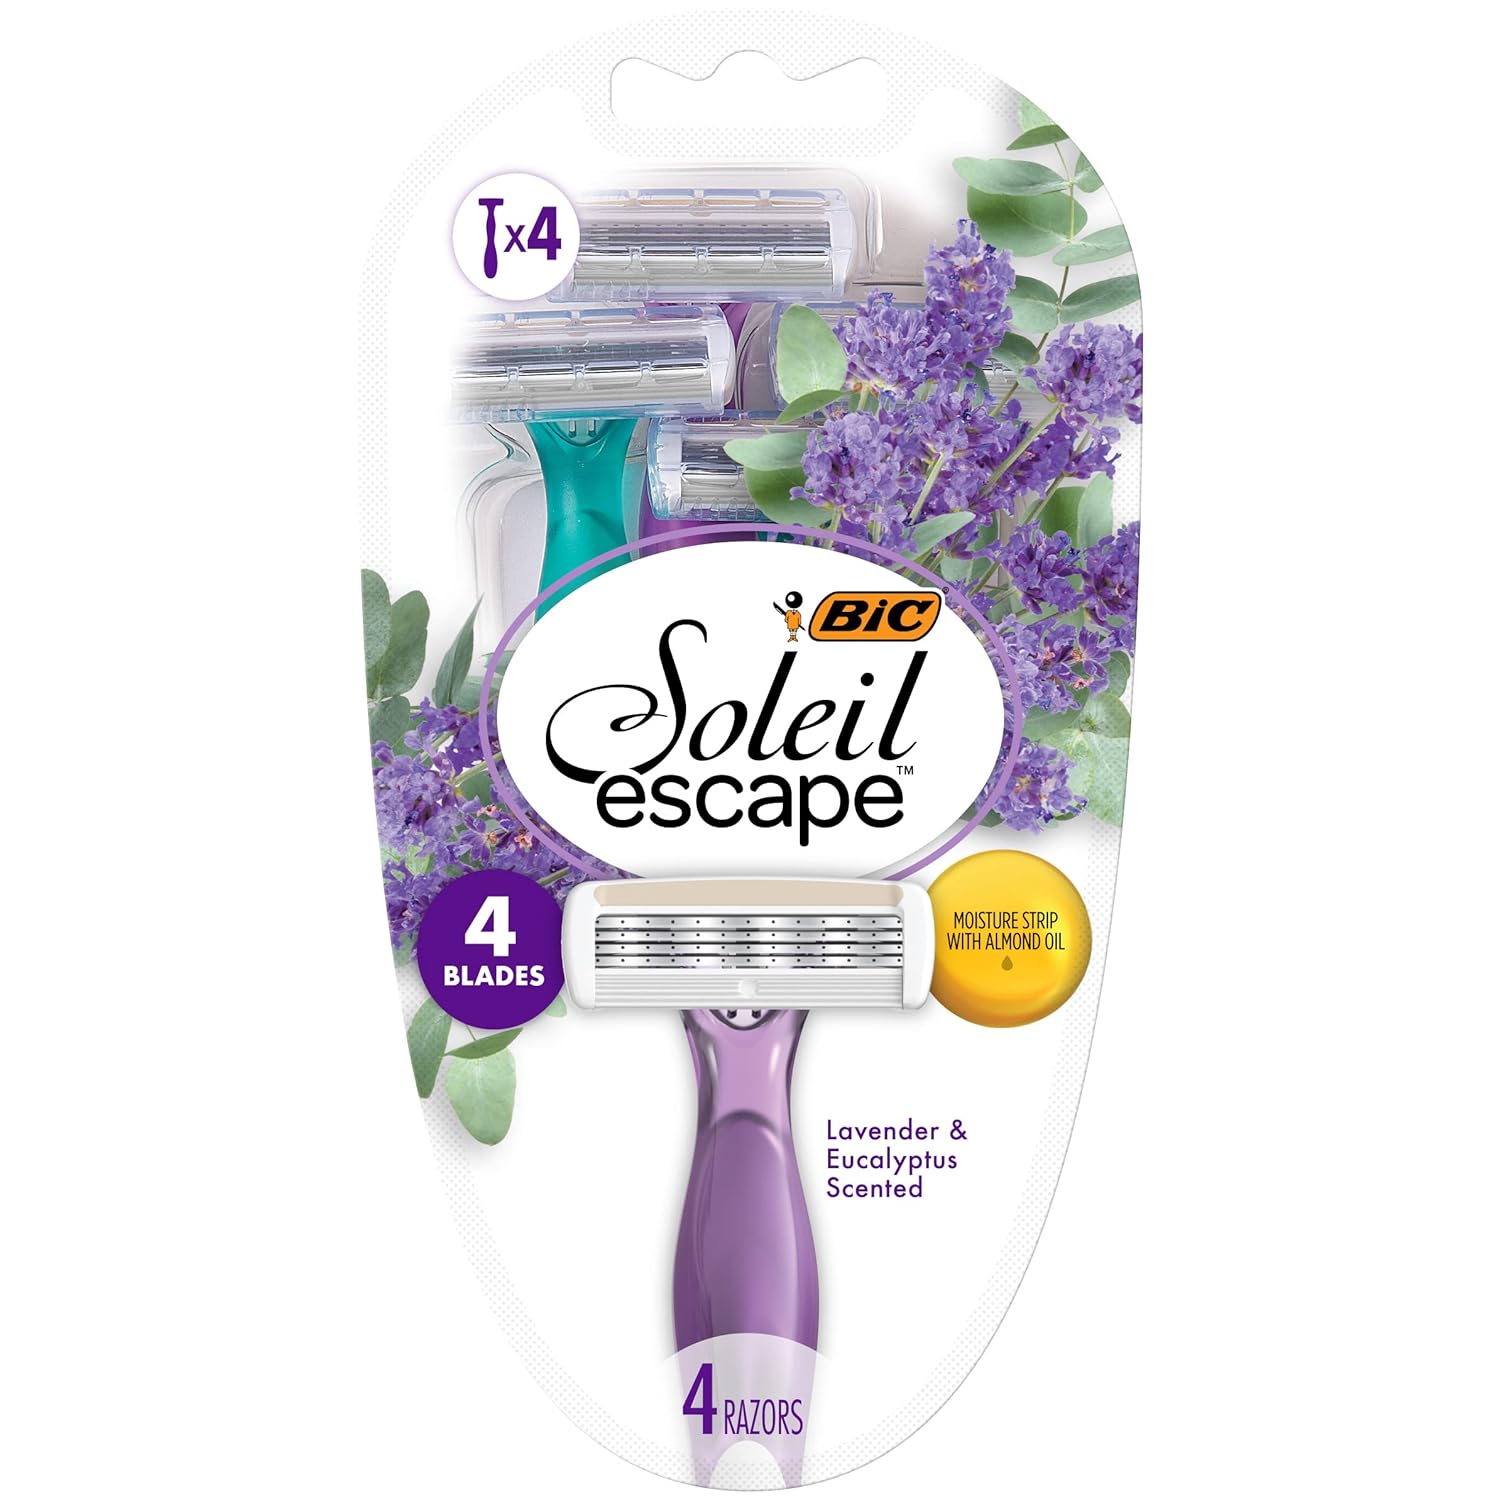 BIC Soleil Escape Women' Disposable Razors, 4 Blade Ladies Razors, Moisture Strip With 100% Natural Almond Oil, Lavender and Eucalyptus Scented Handles, 4 Pack